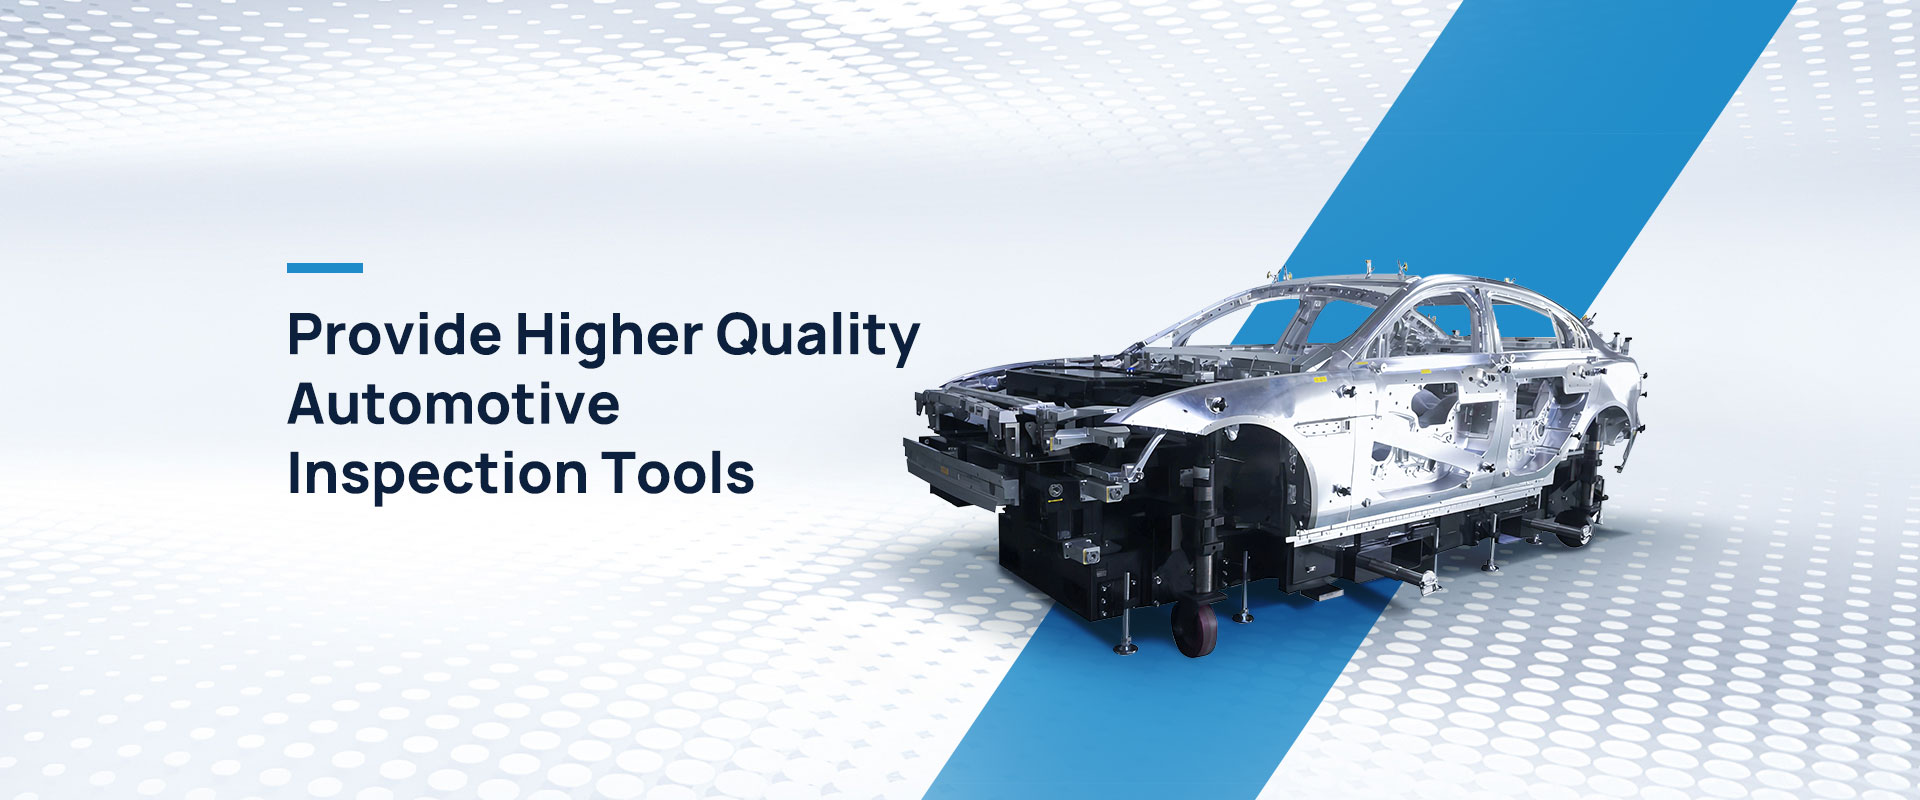 Provide Higher Quality Automotive Inspection Tools